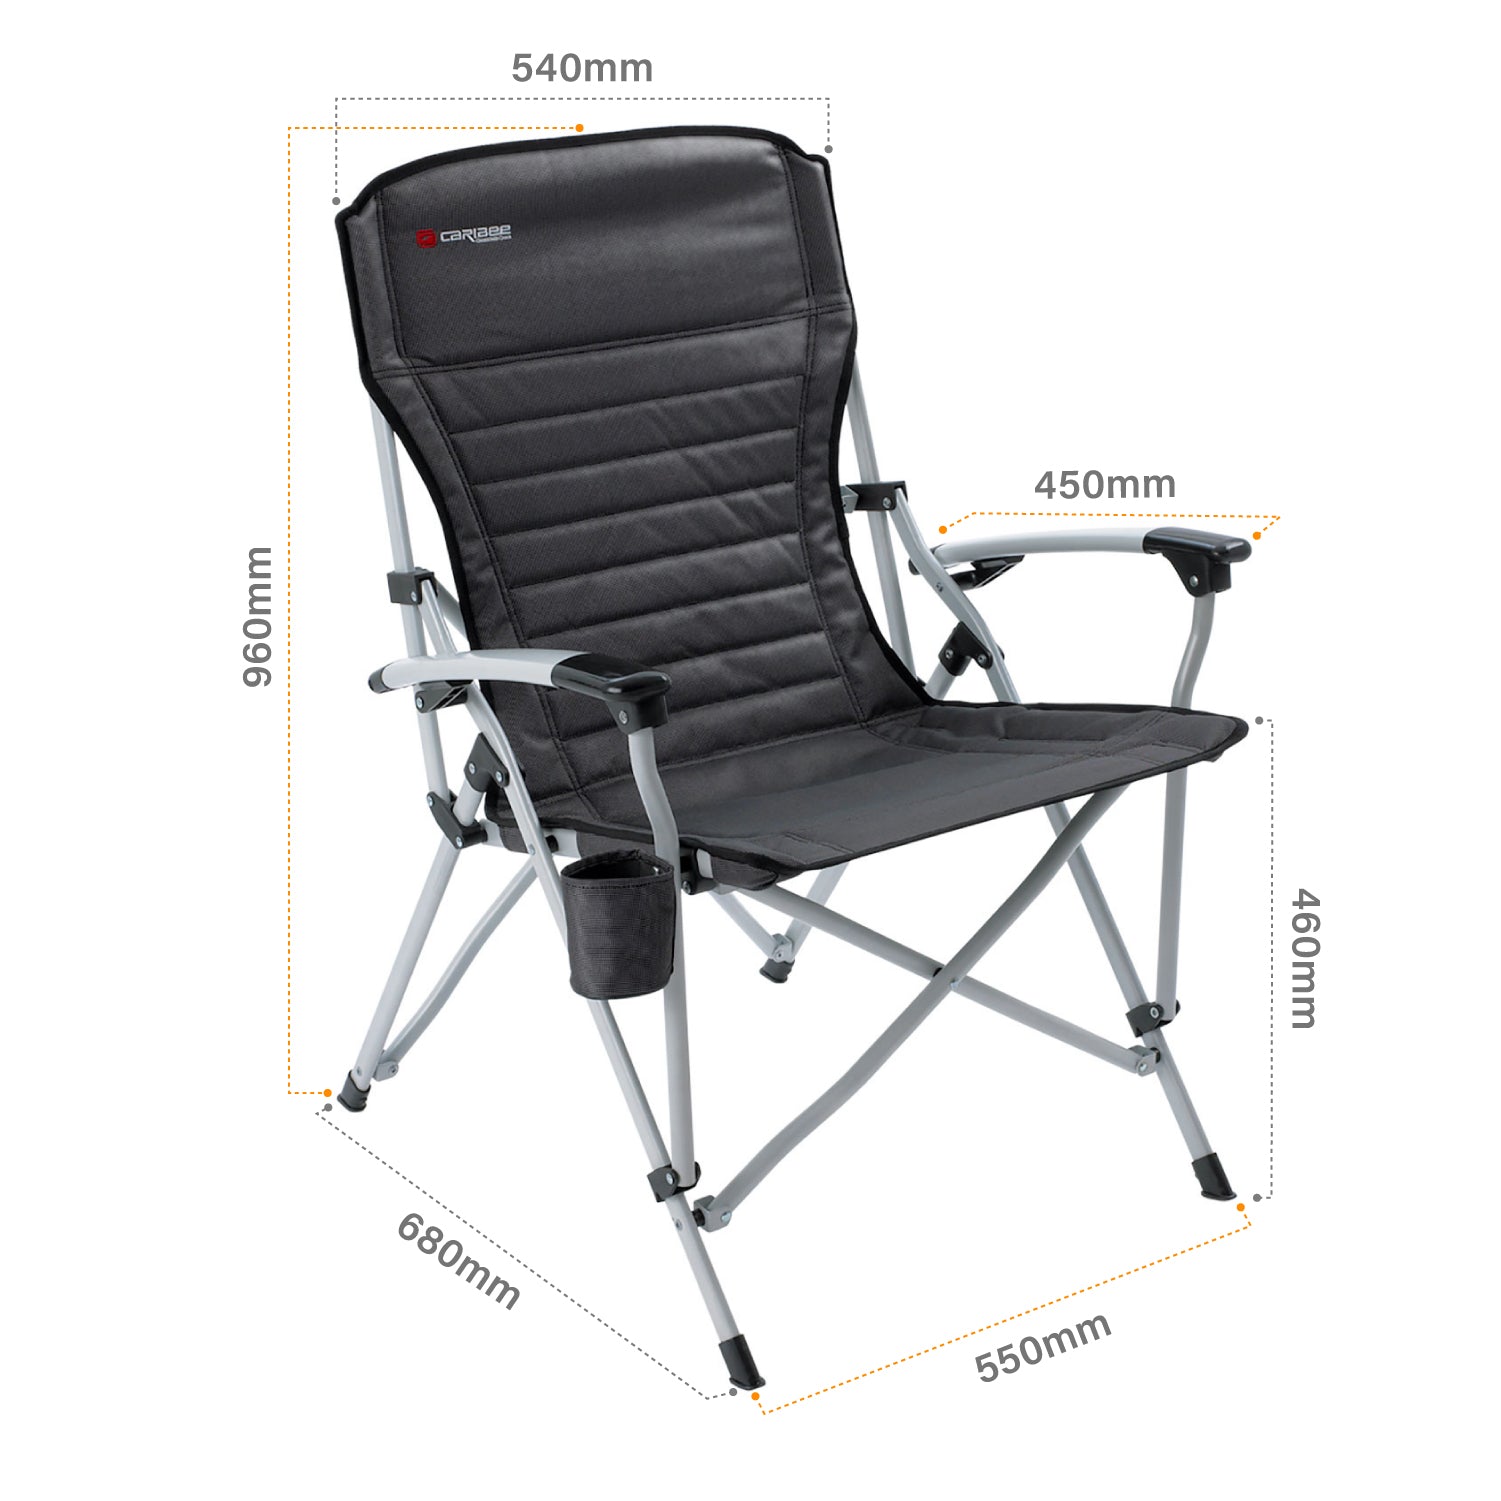 Caribee Crossover Chair dimensions